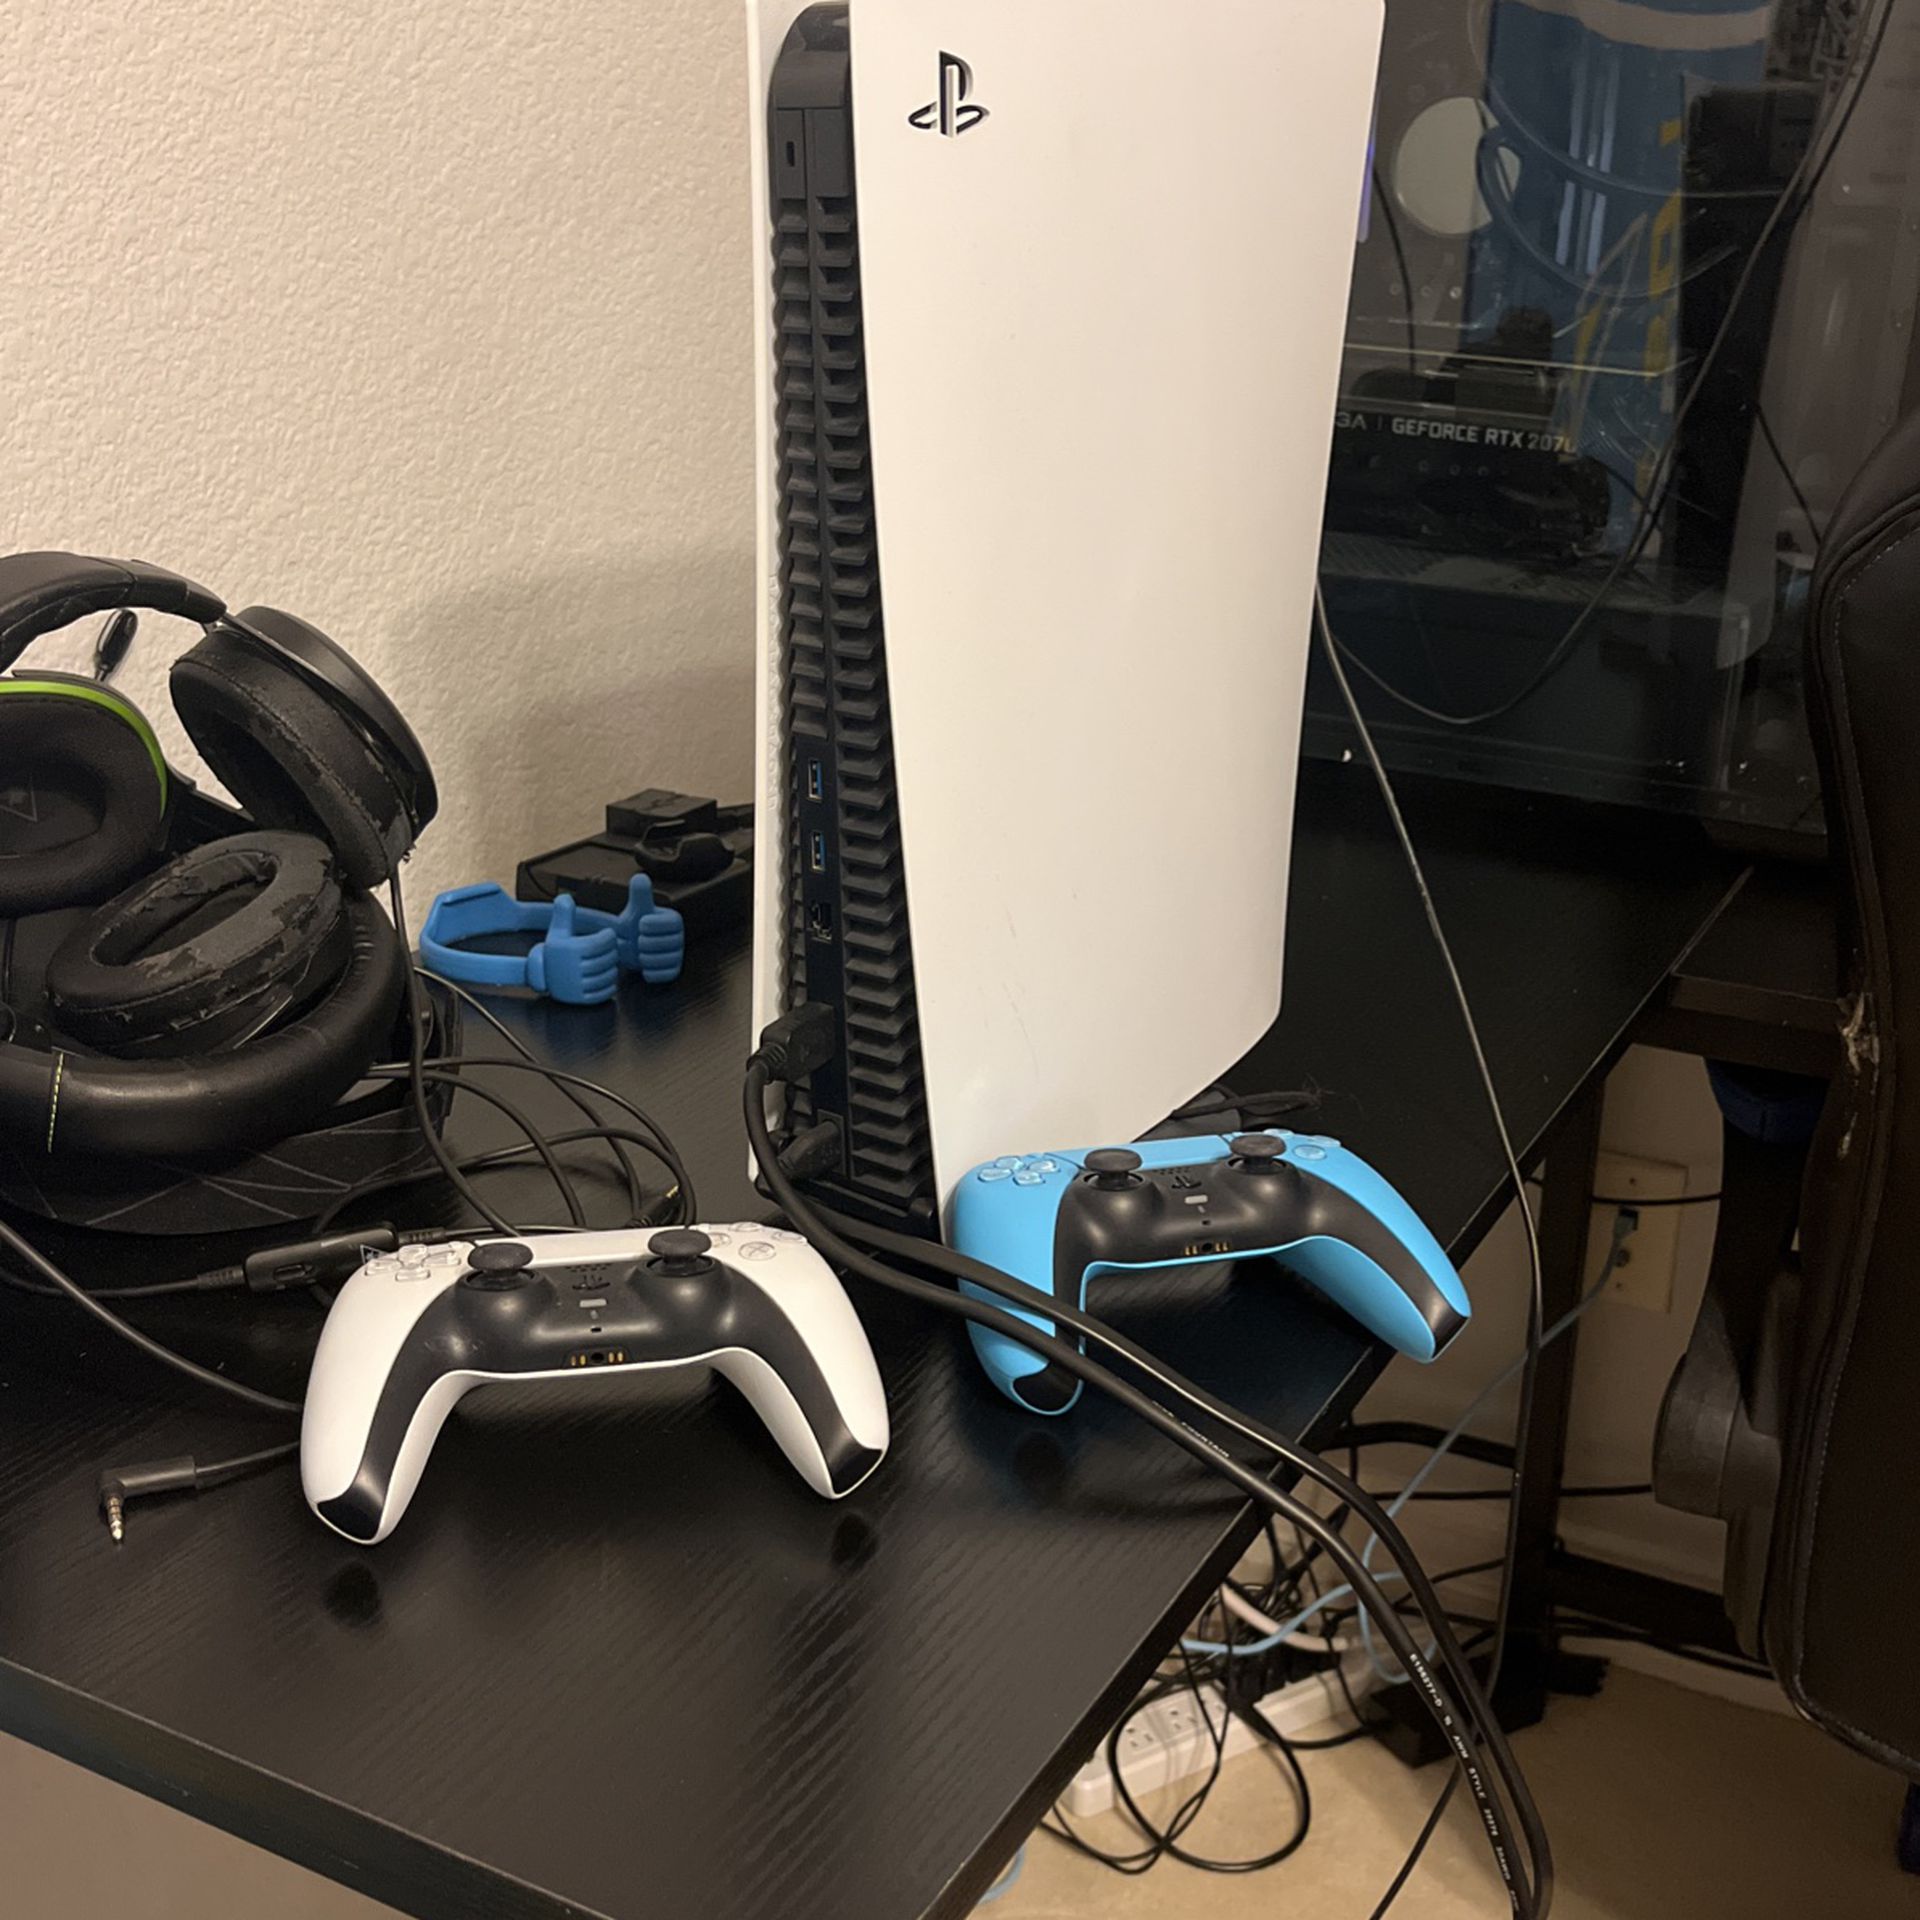 LIGHTLY USED PS5 with Two Controllers